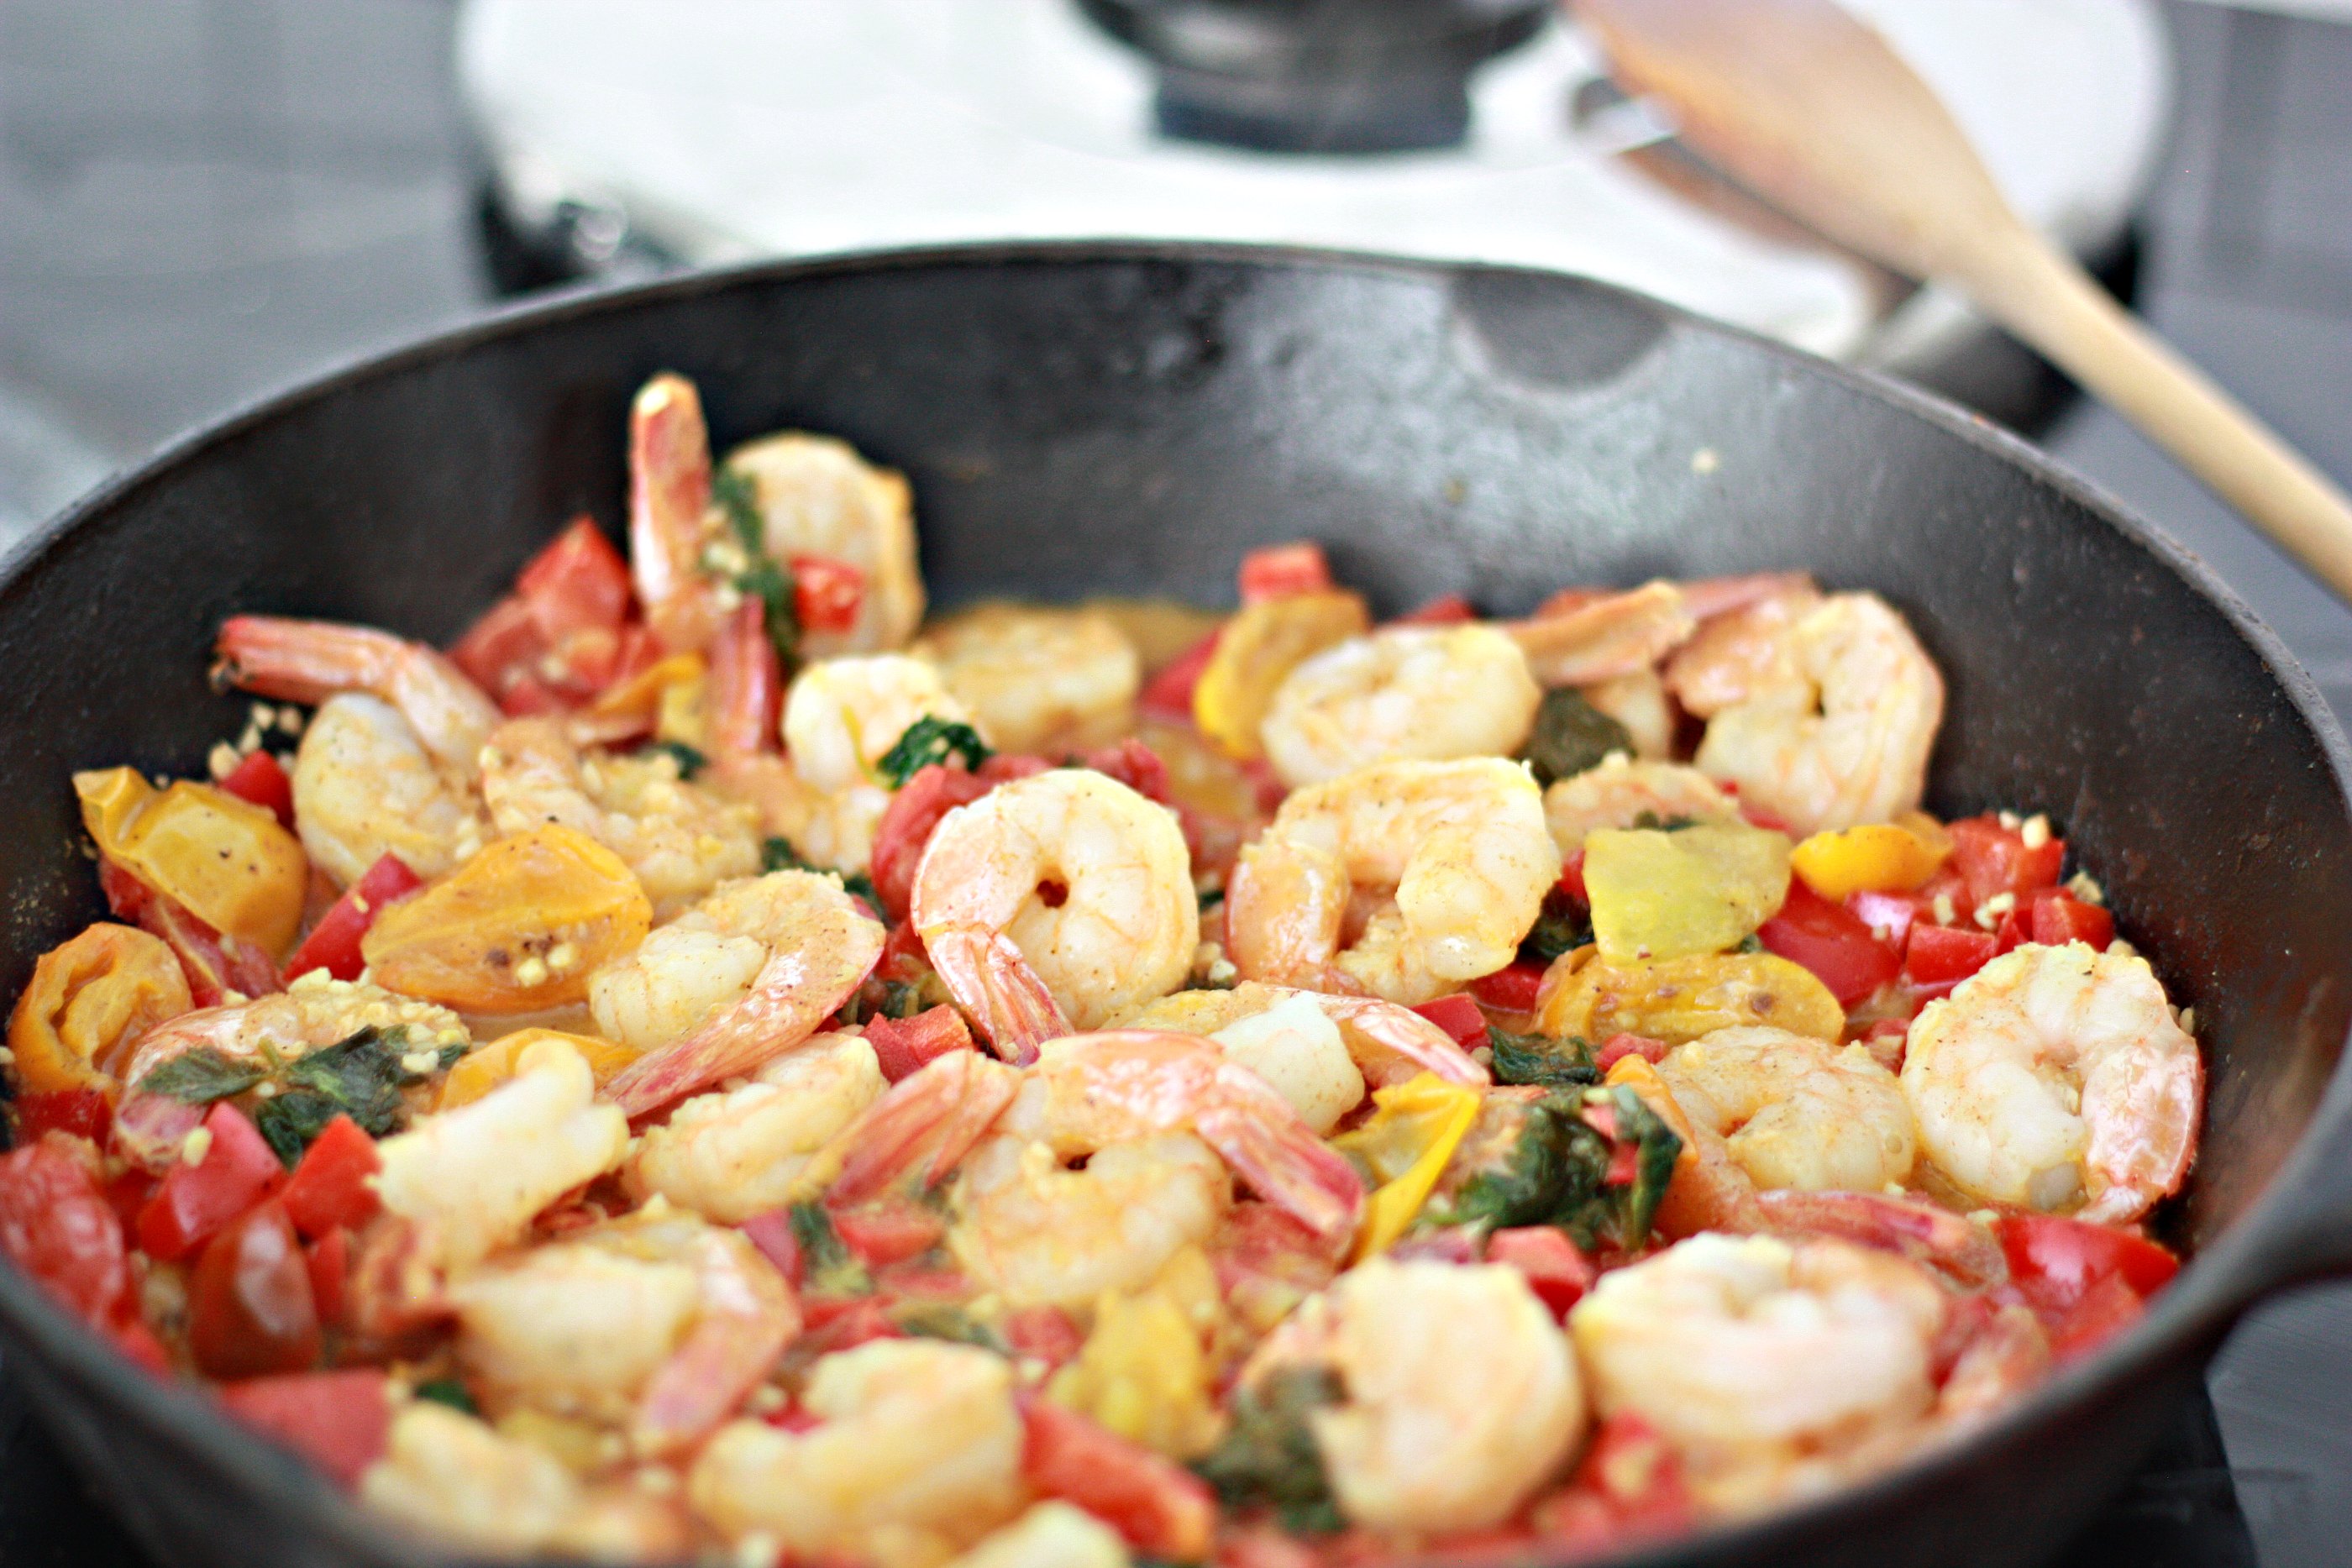 Shrimp for Mexican Shrimp and Grits